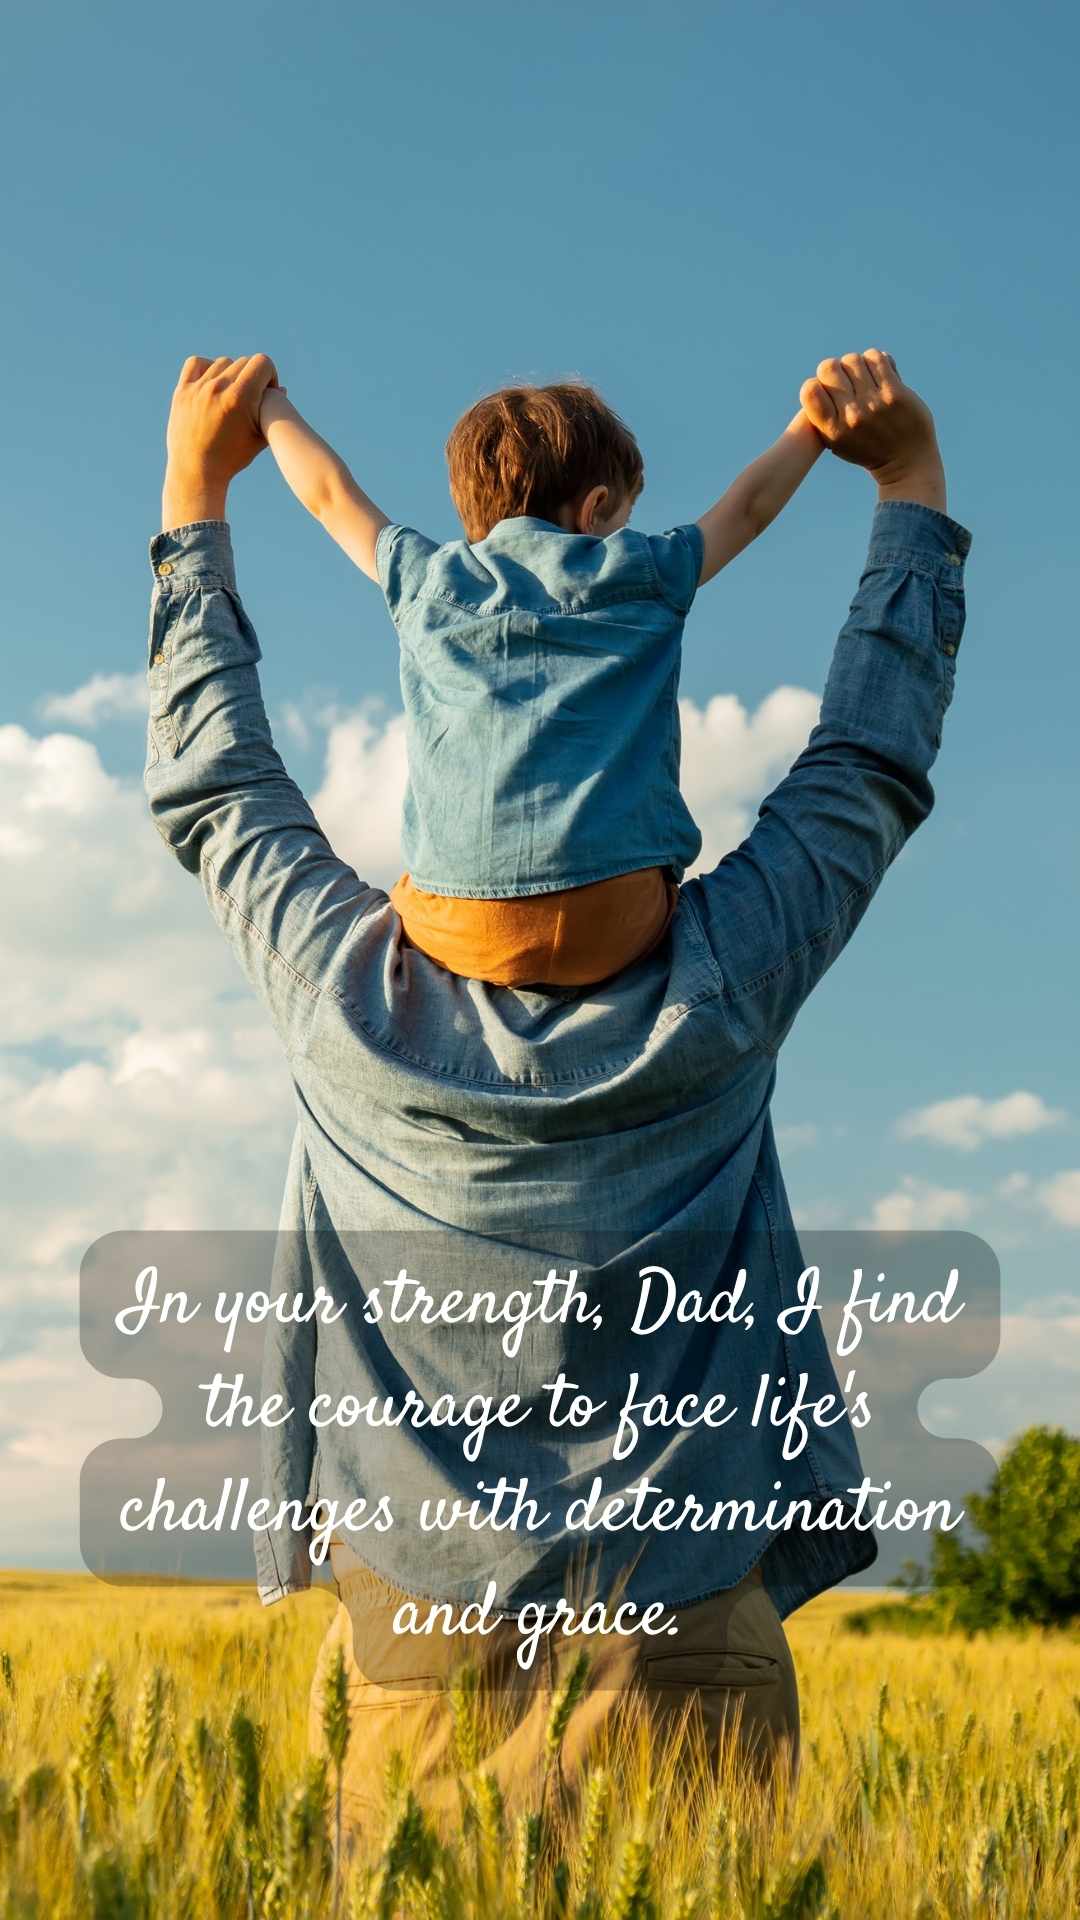 Quote: 'In your strength, Dad, I find the courage to face life's challenges with determination and grace.'